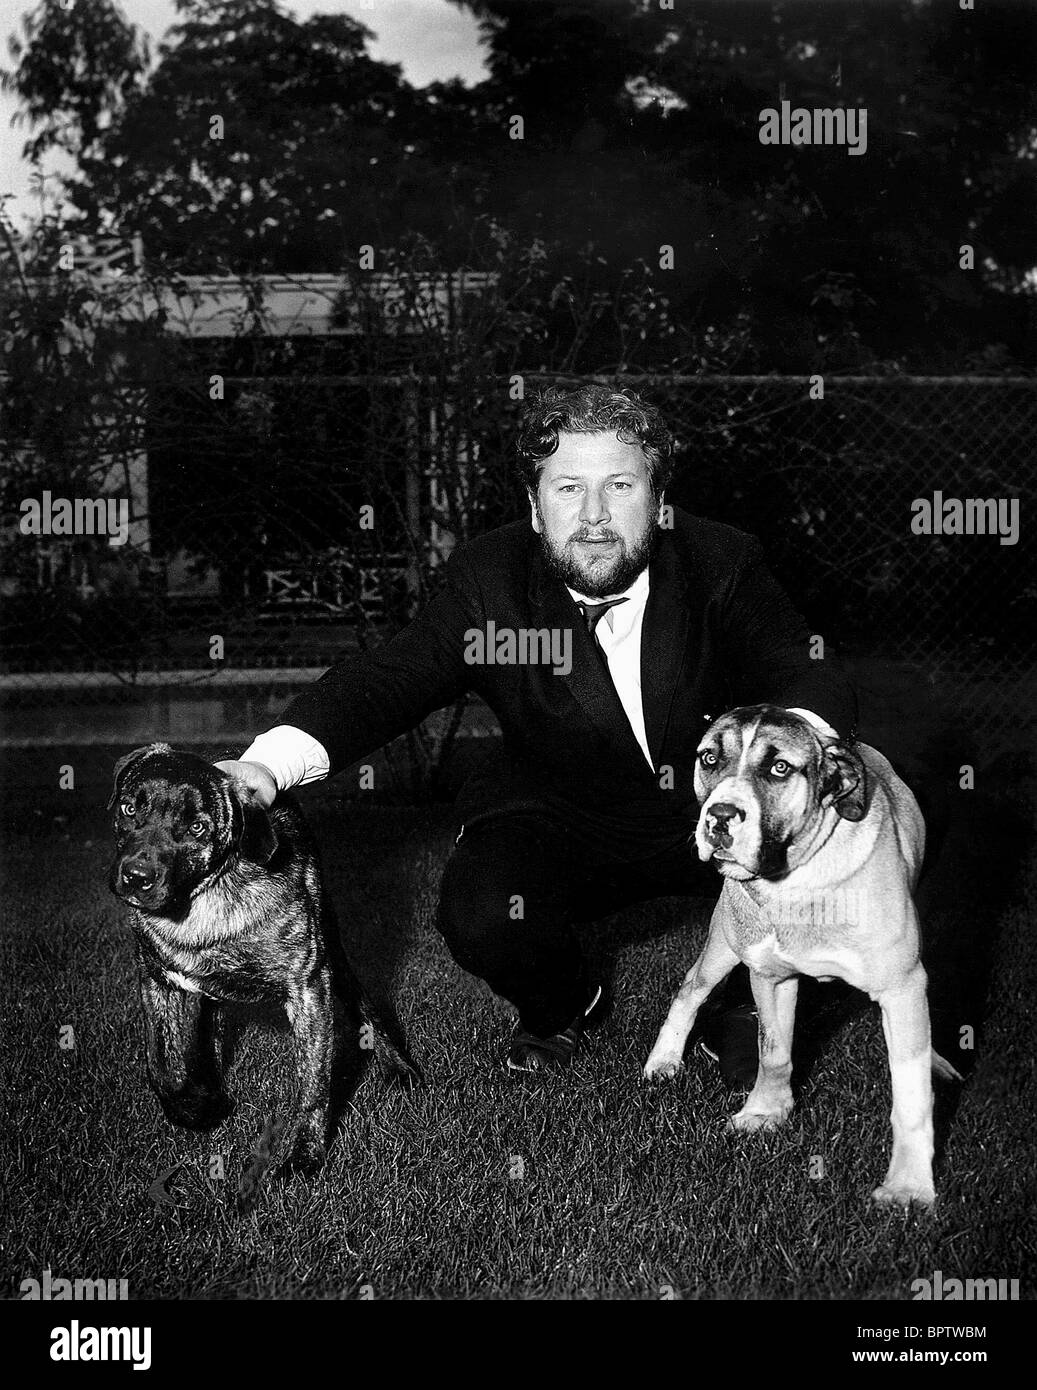 PETER USTINOV WITH DOGS ACTOR (1960) Stock Photo